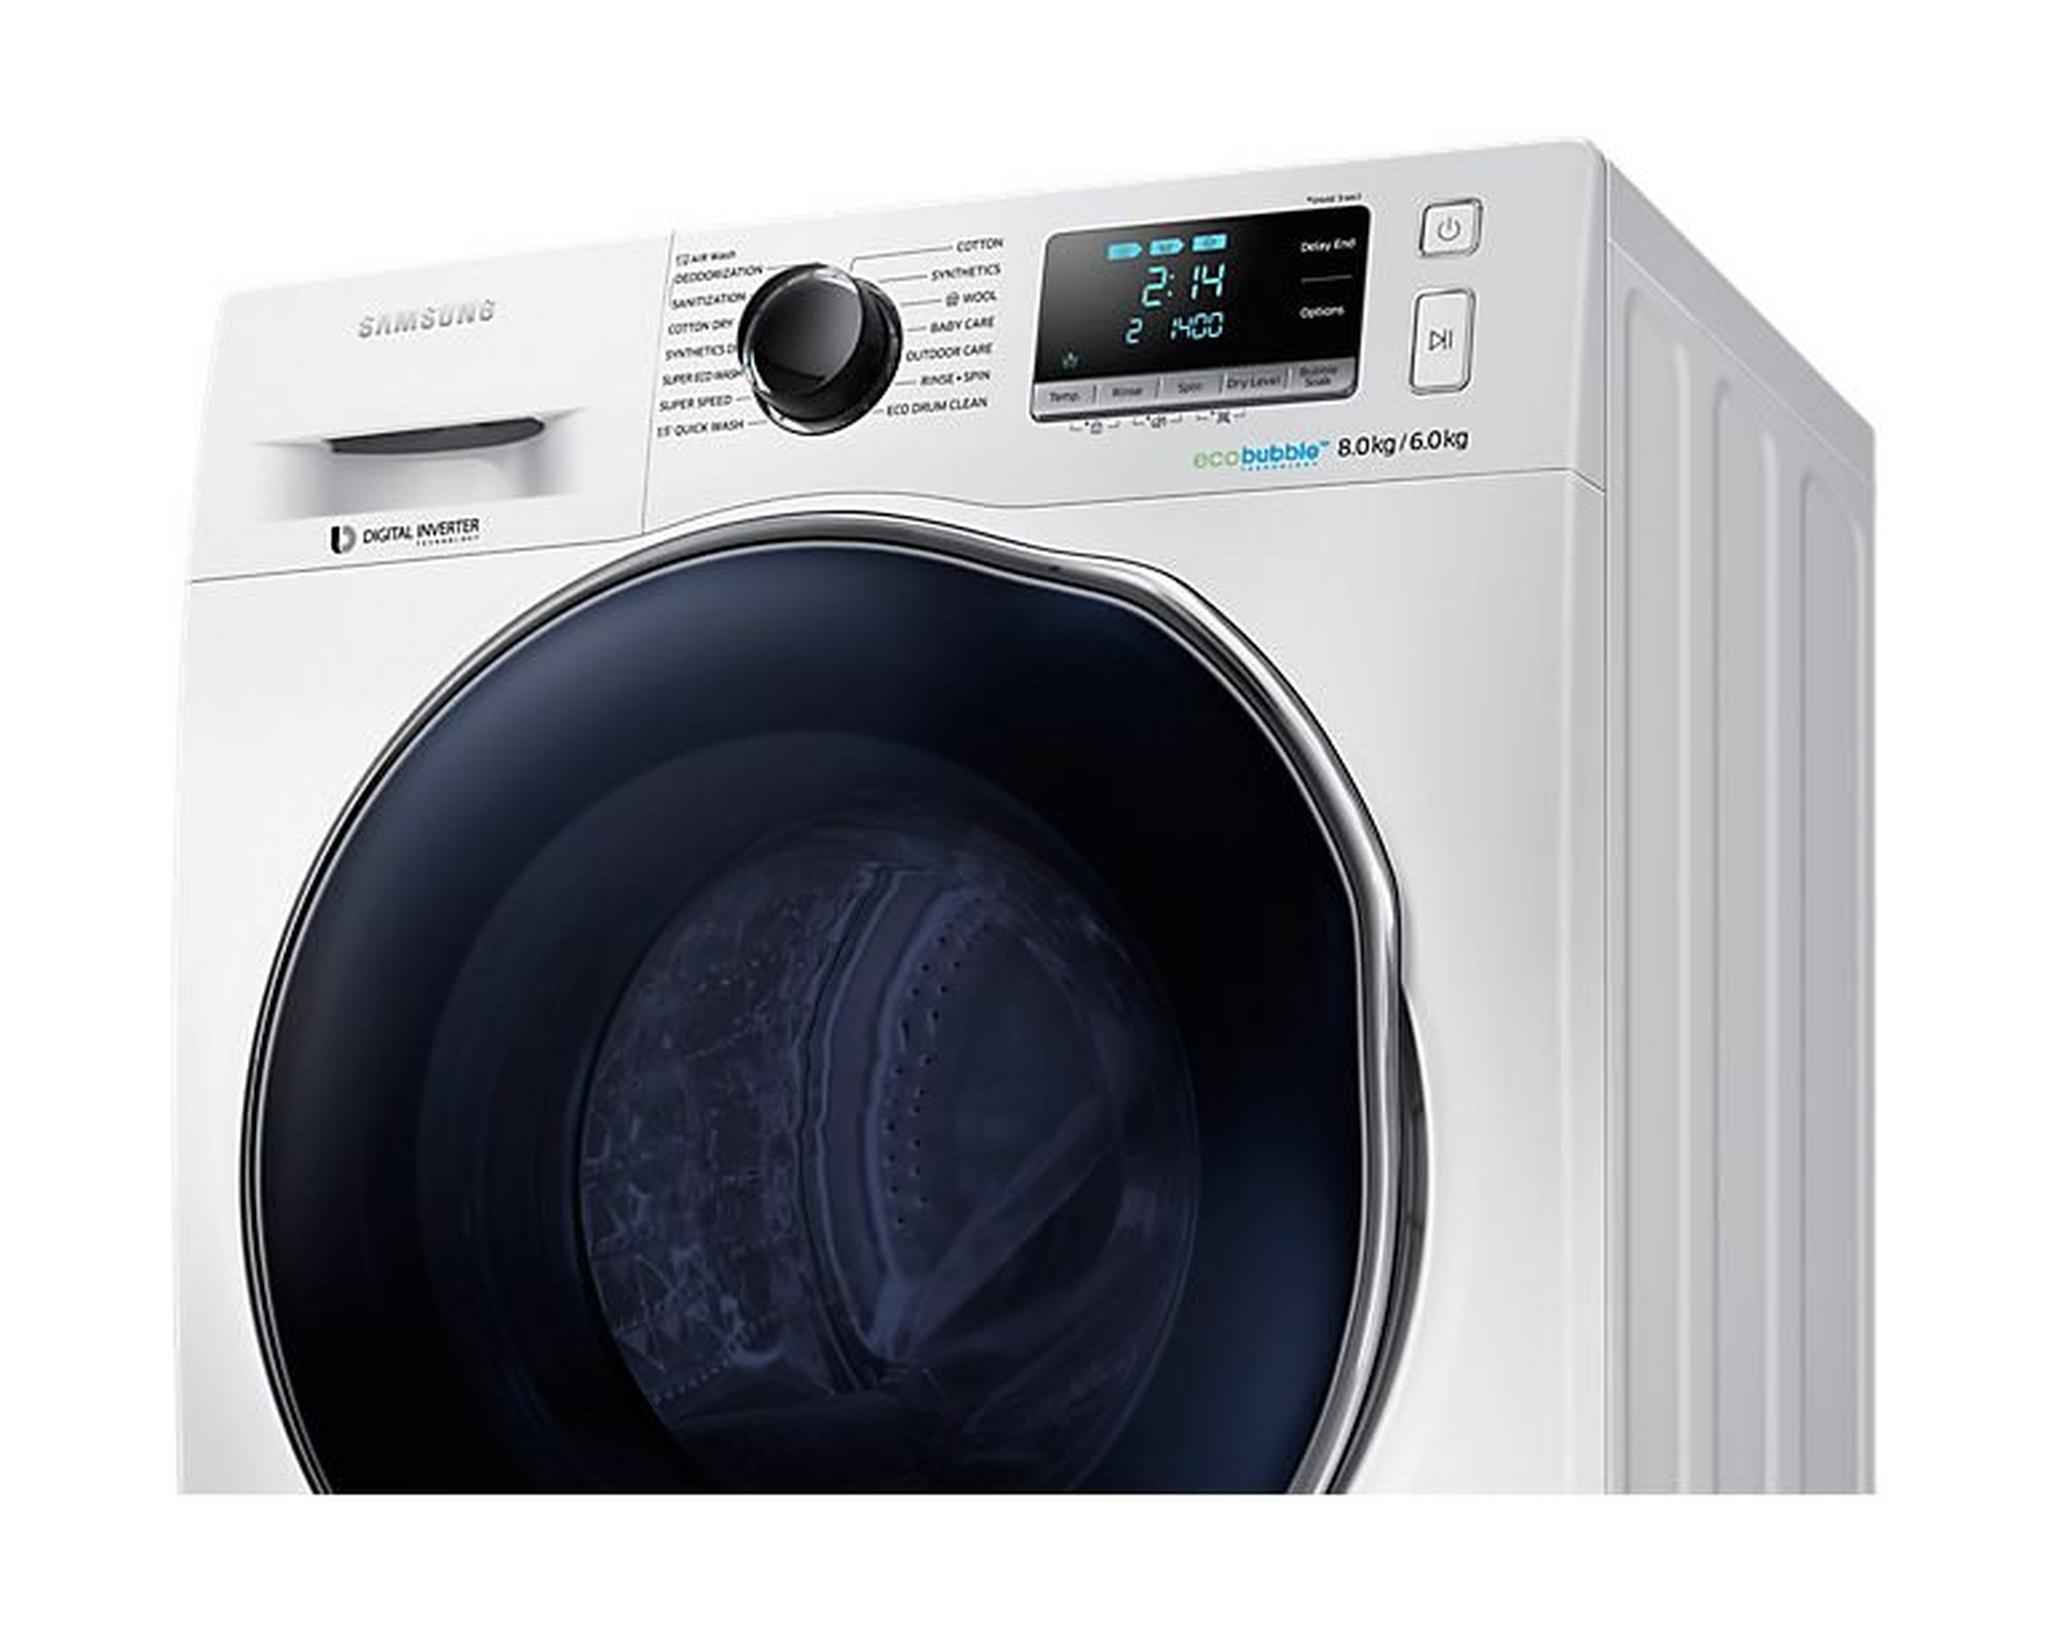 Samsung 8/6 Kg Front Load Washer Dryer with Eco bubble (WD80J6410AW) – White